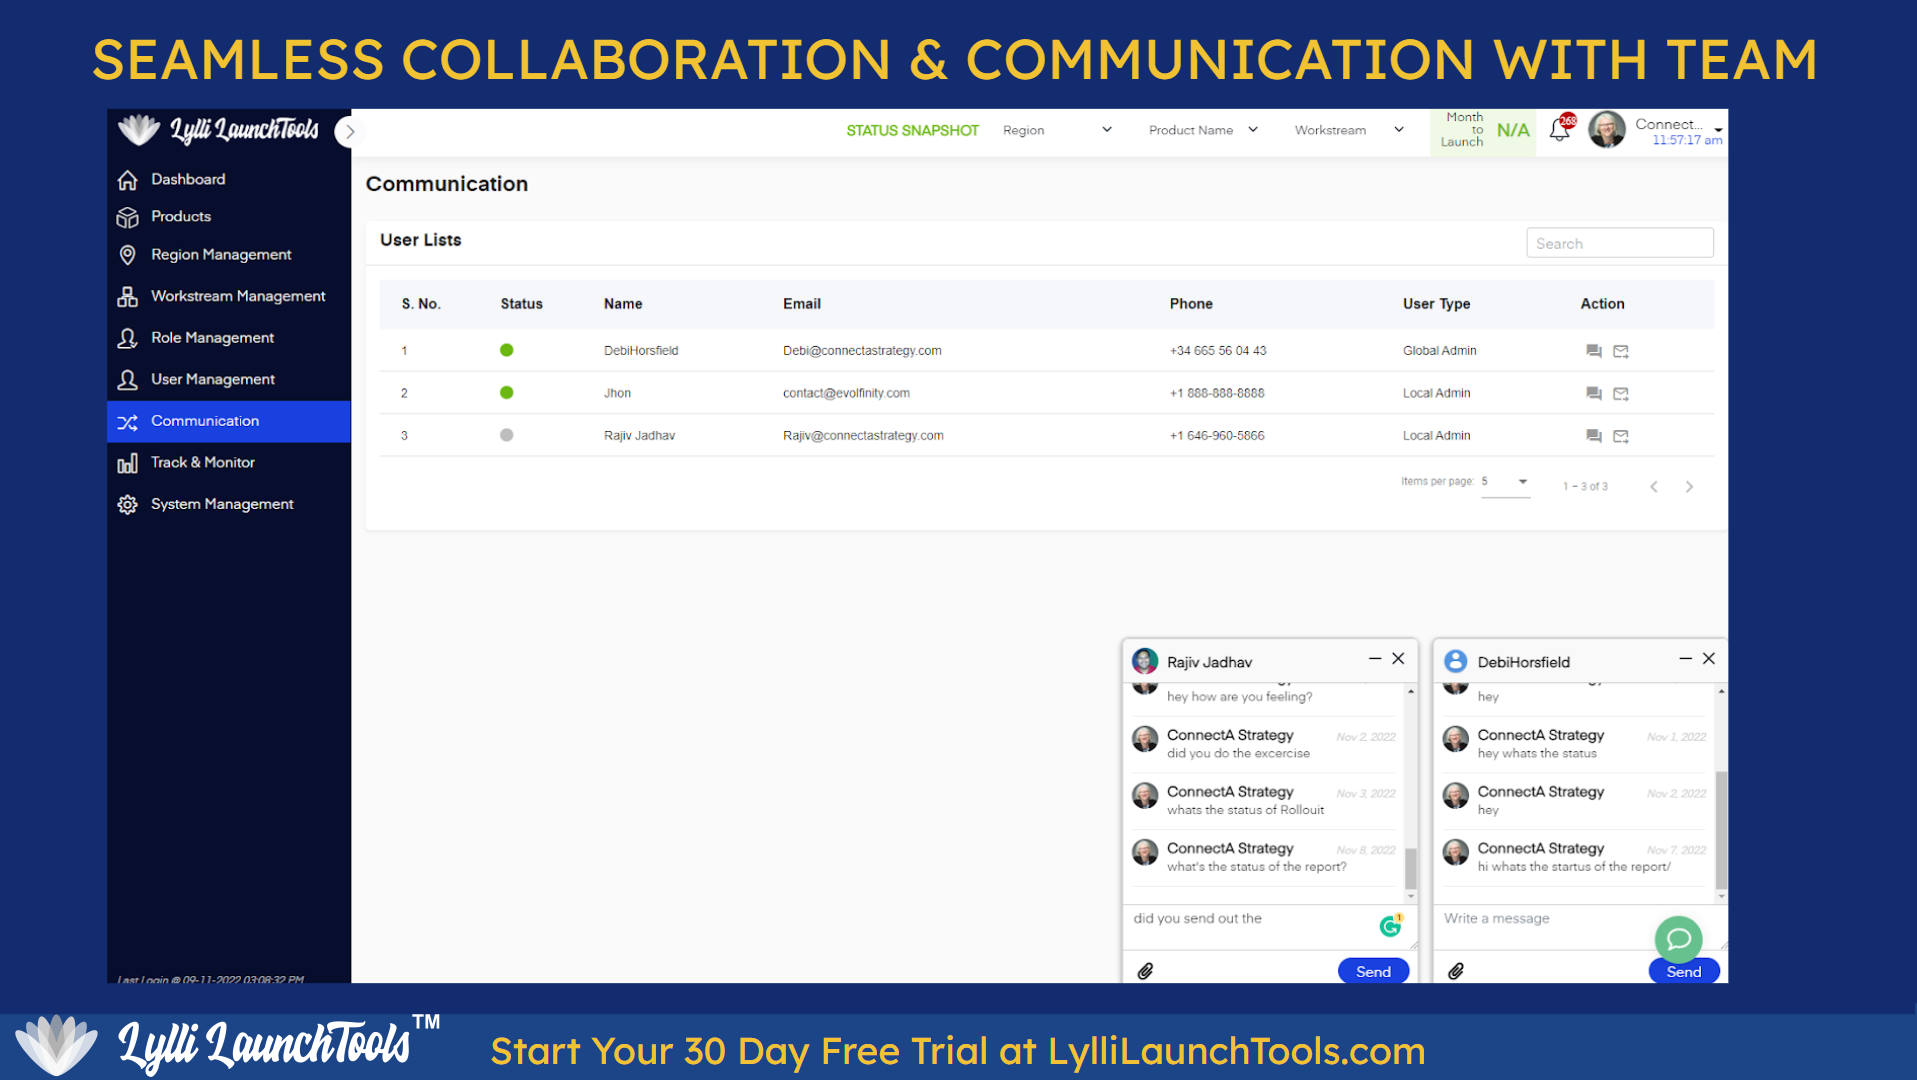 Fast & seamless communication among team members is critical for product launch success. Lylli LaunchTools Direct Message feature achieves this. Launch Better, Faster & Smoother. Start for free today at LylliLaunchTools.com/signup